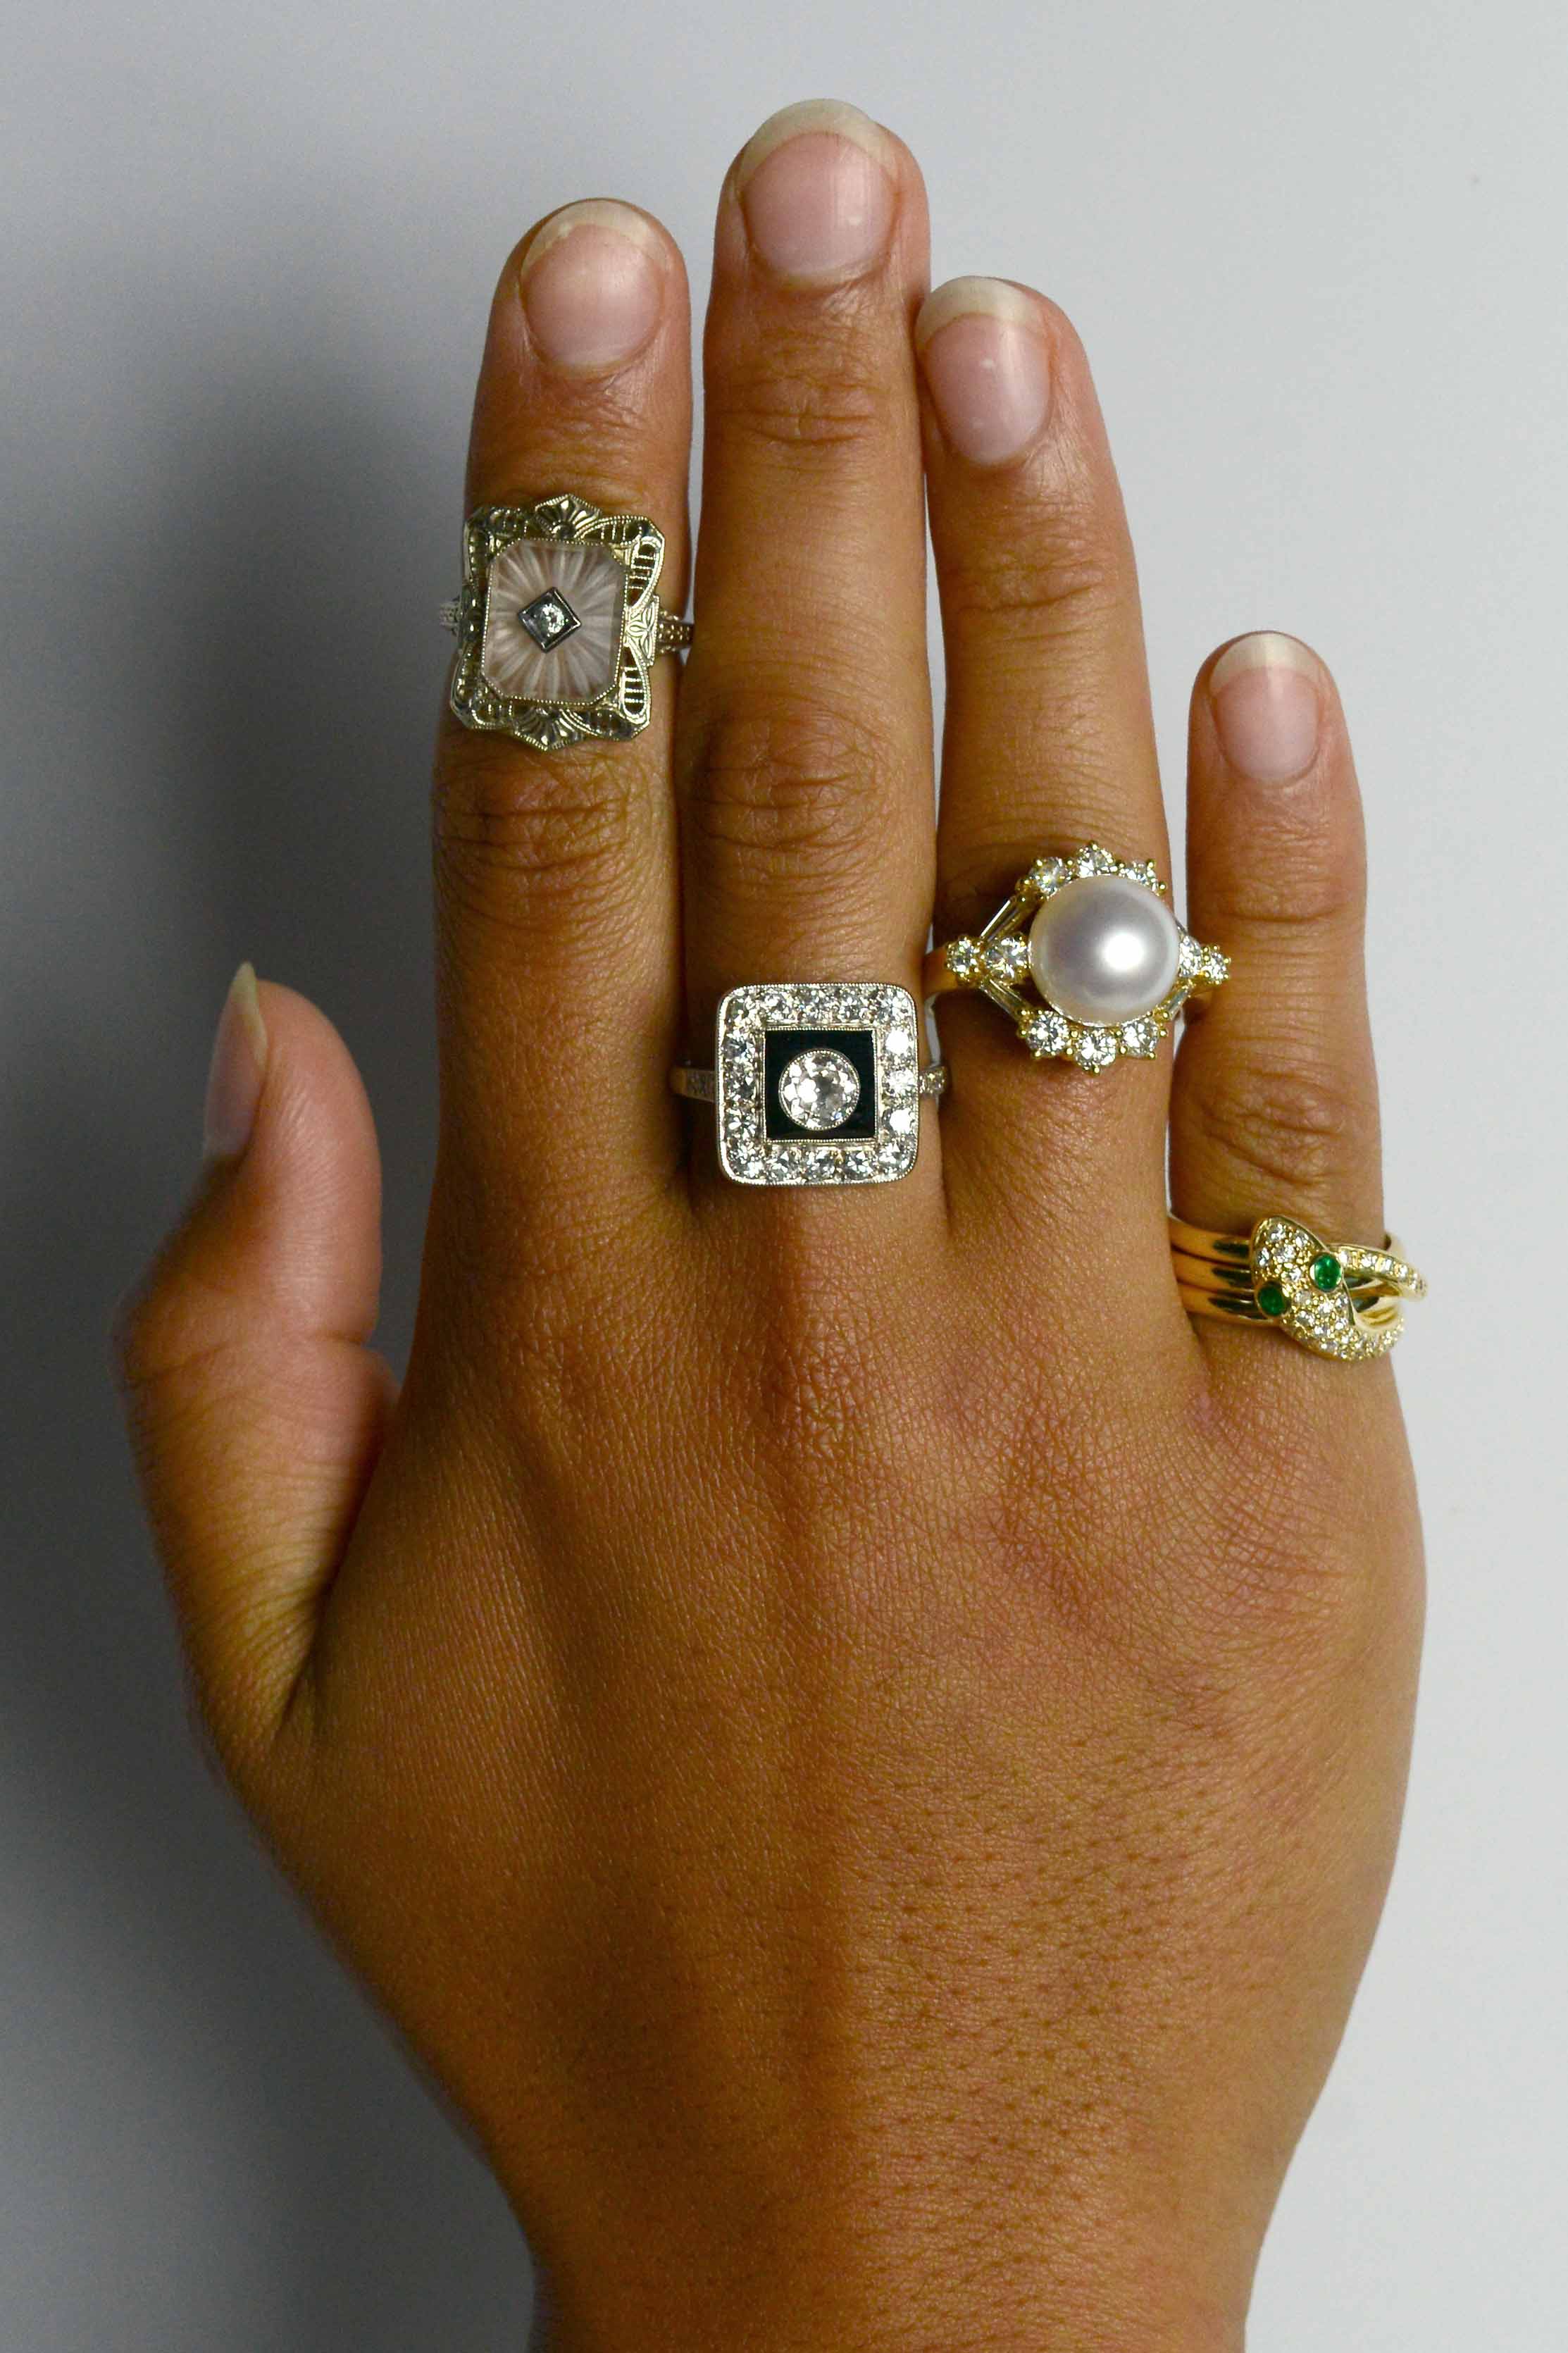 A collection of unique gem and diamond halo statement rings.